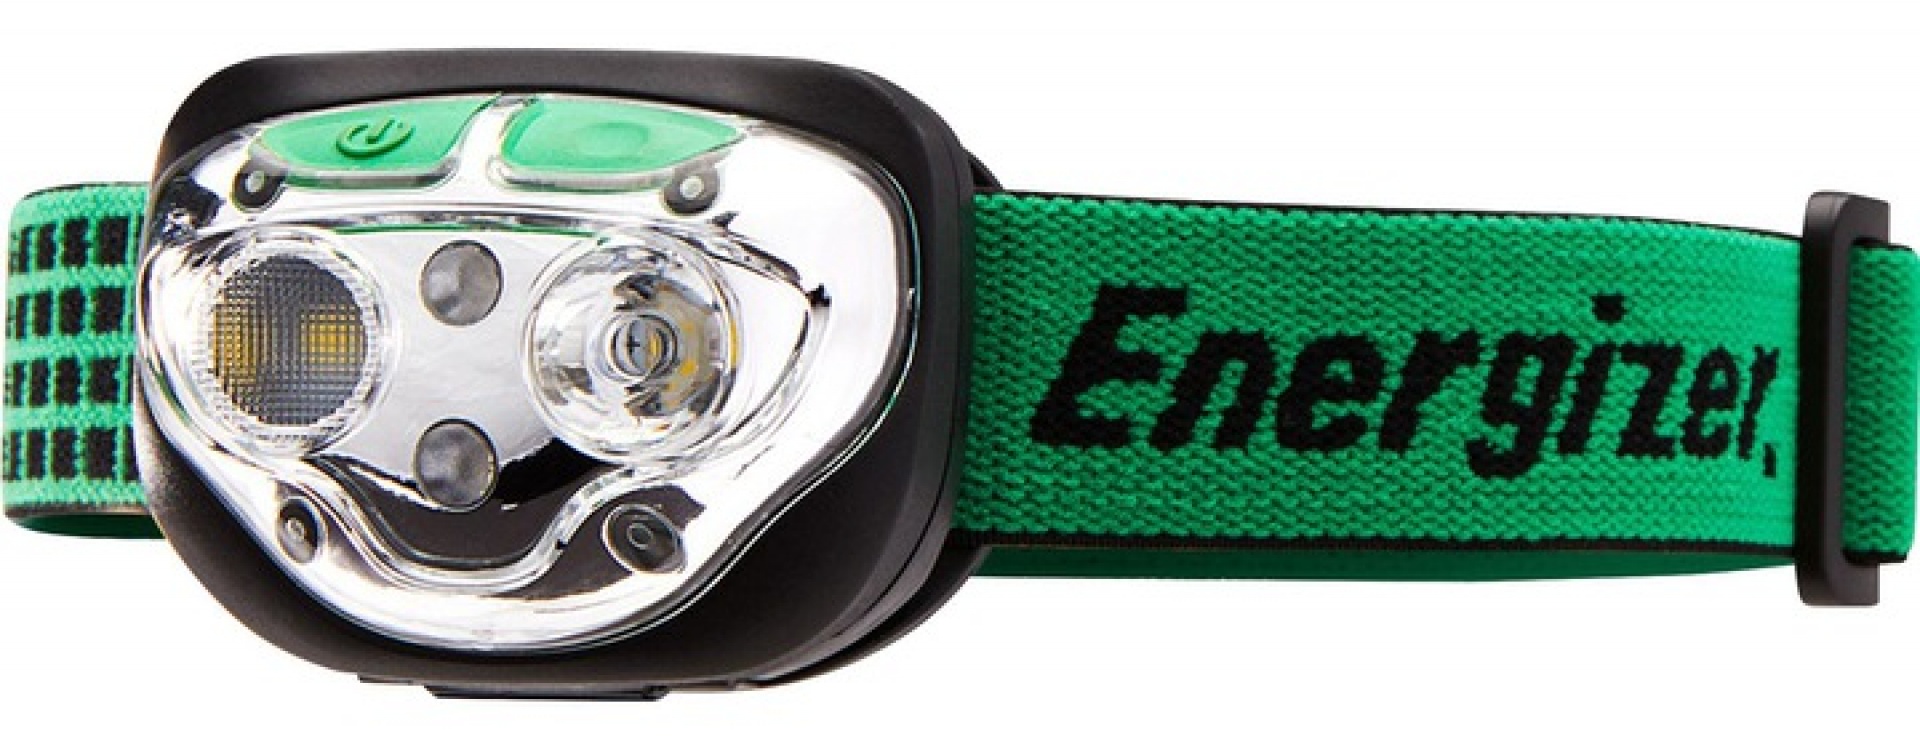 ENERGIZER Vision Rechargeable Headlamp 400 Lumens